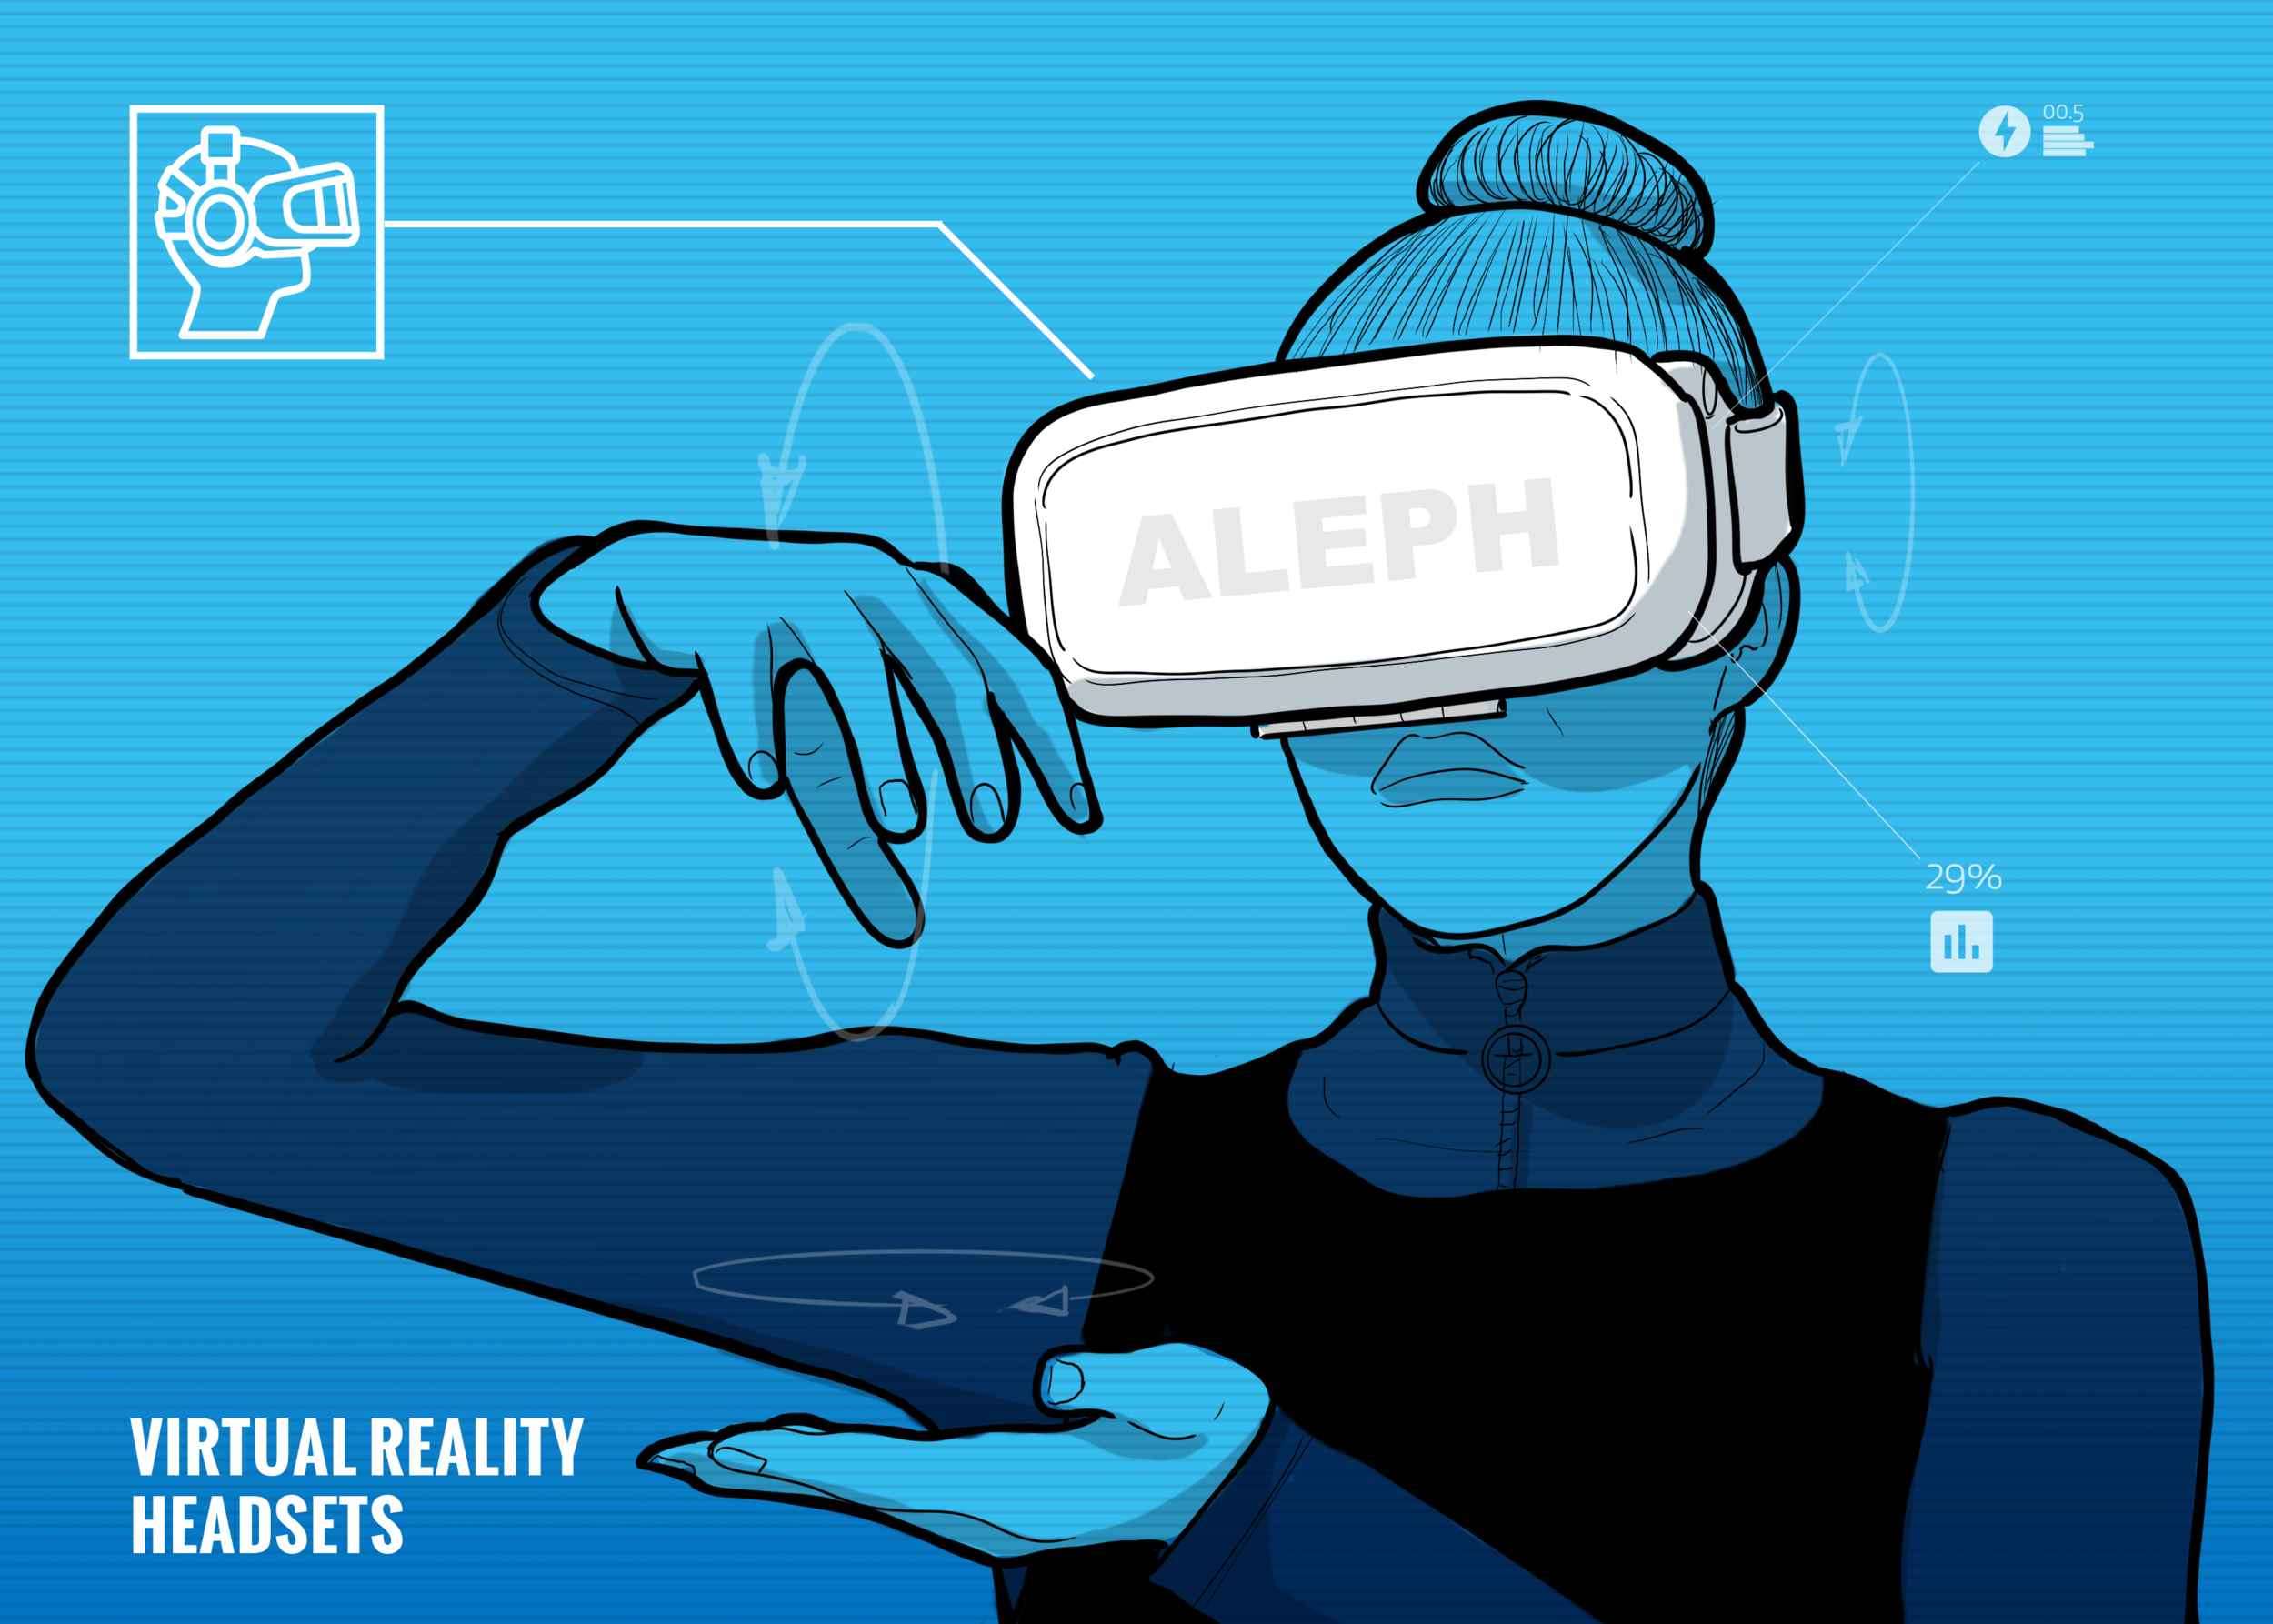 25 - Vitrual Reality Headsets MKT.png